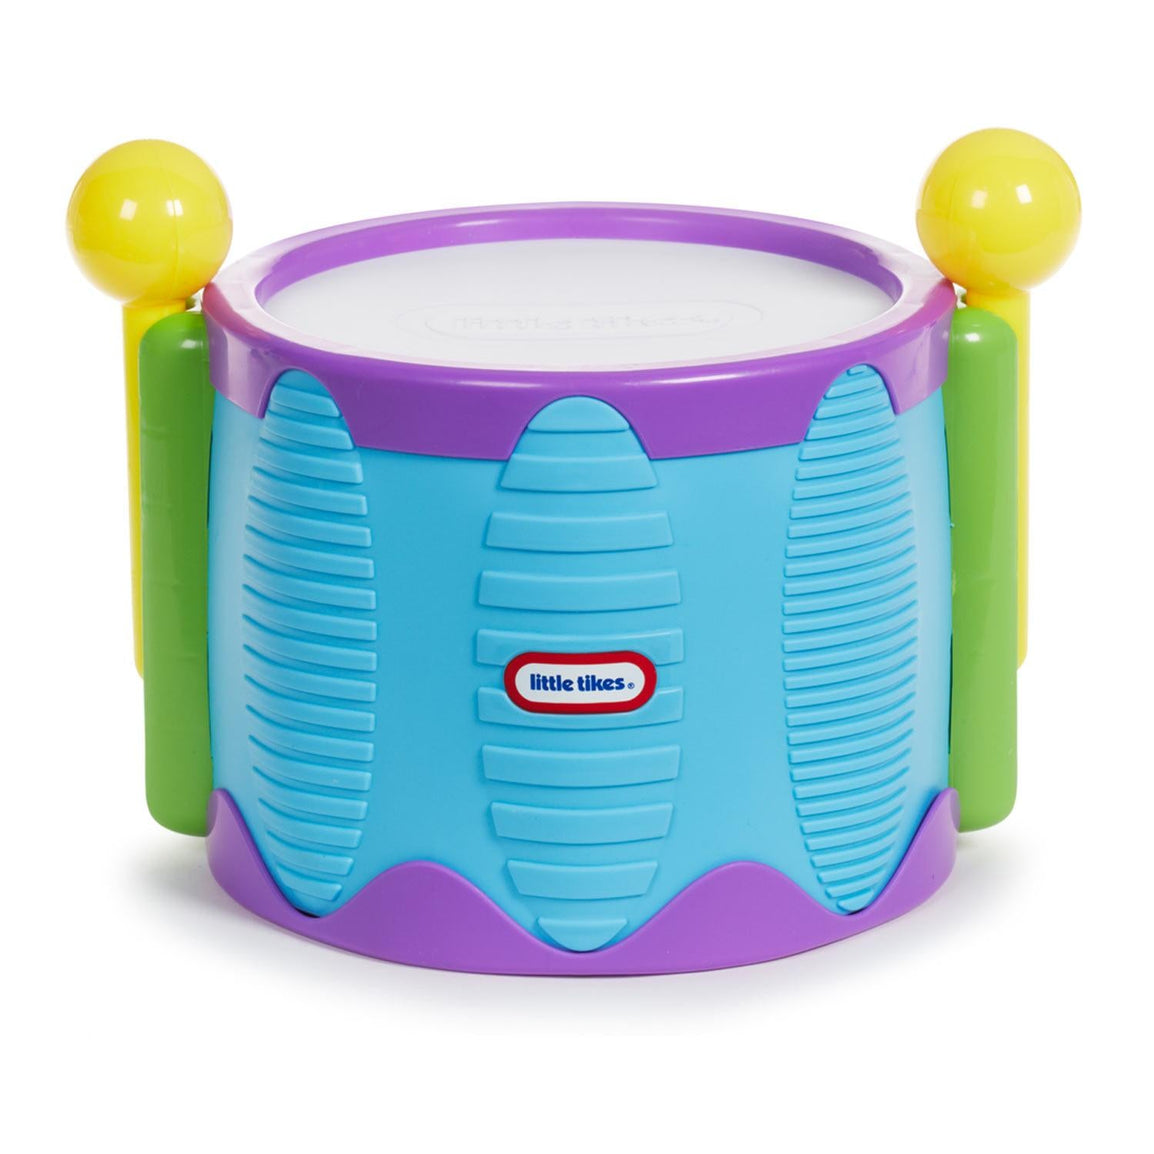 Kids can use the drum sticks or their hands on the top to make drum sounds